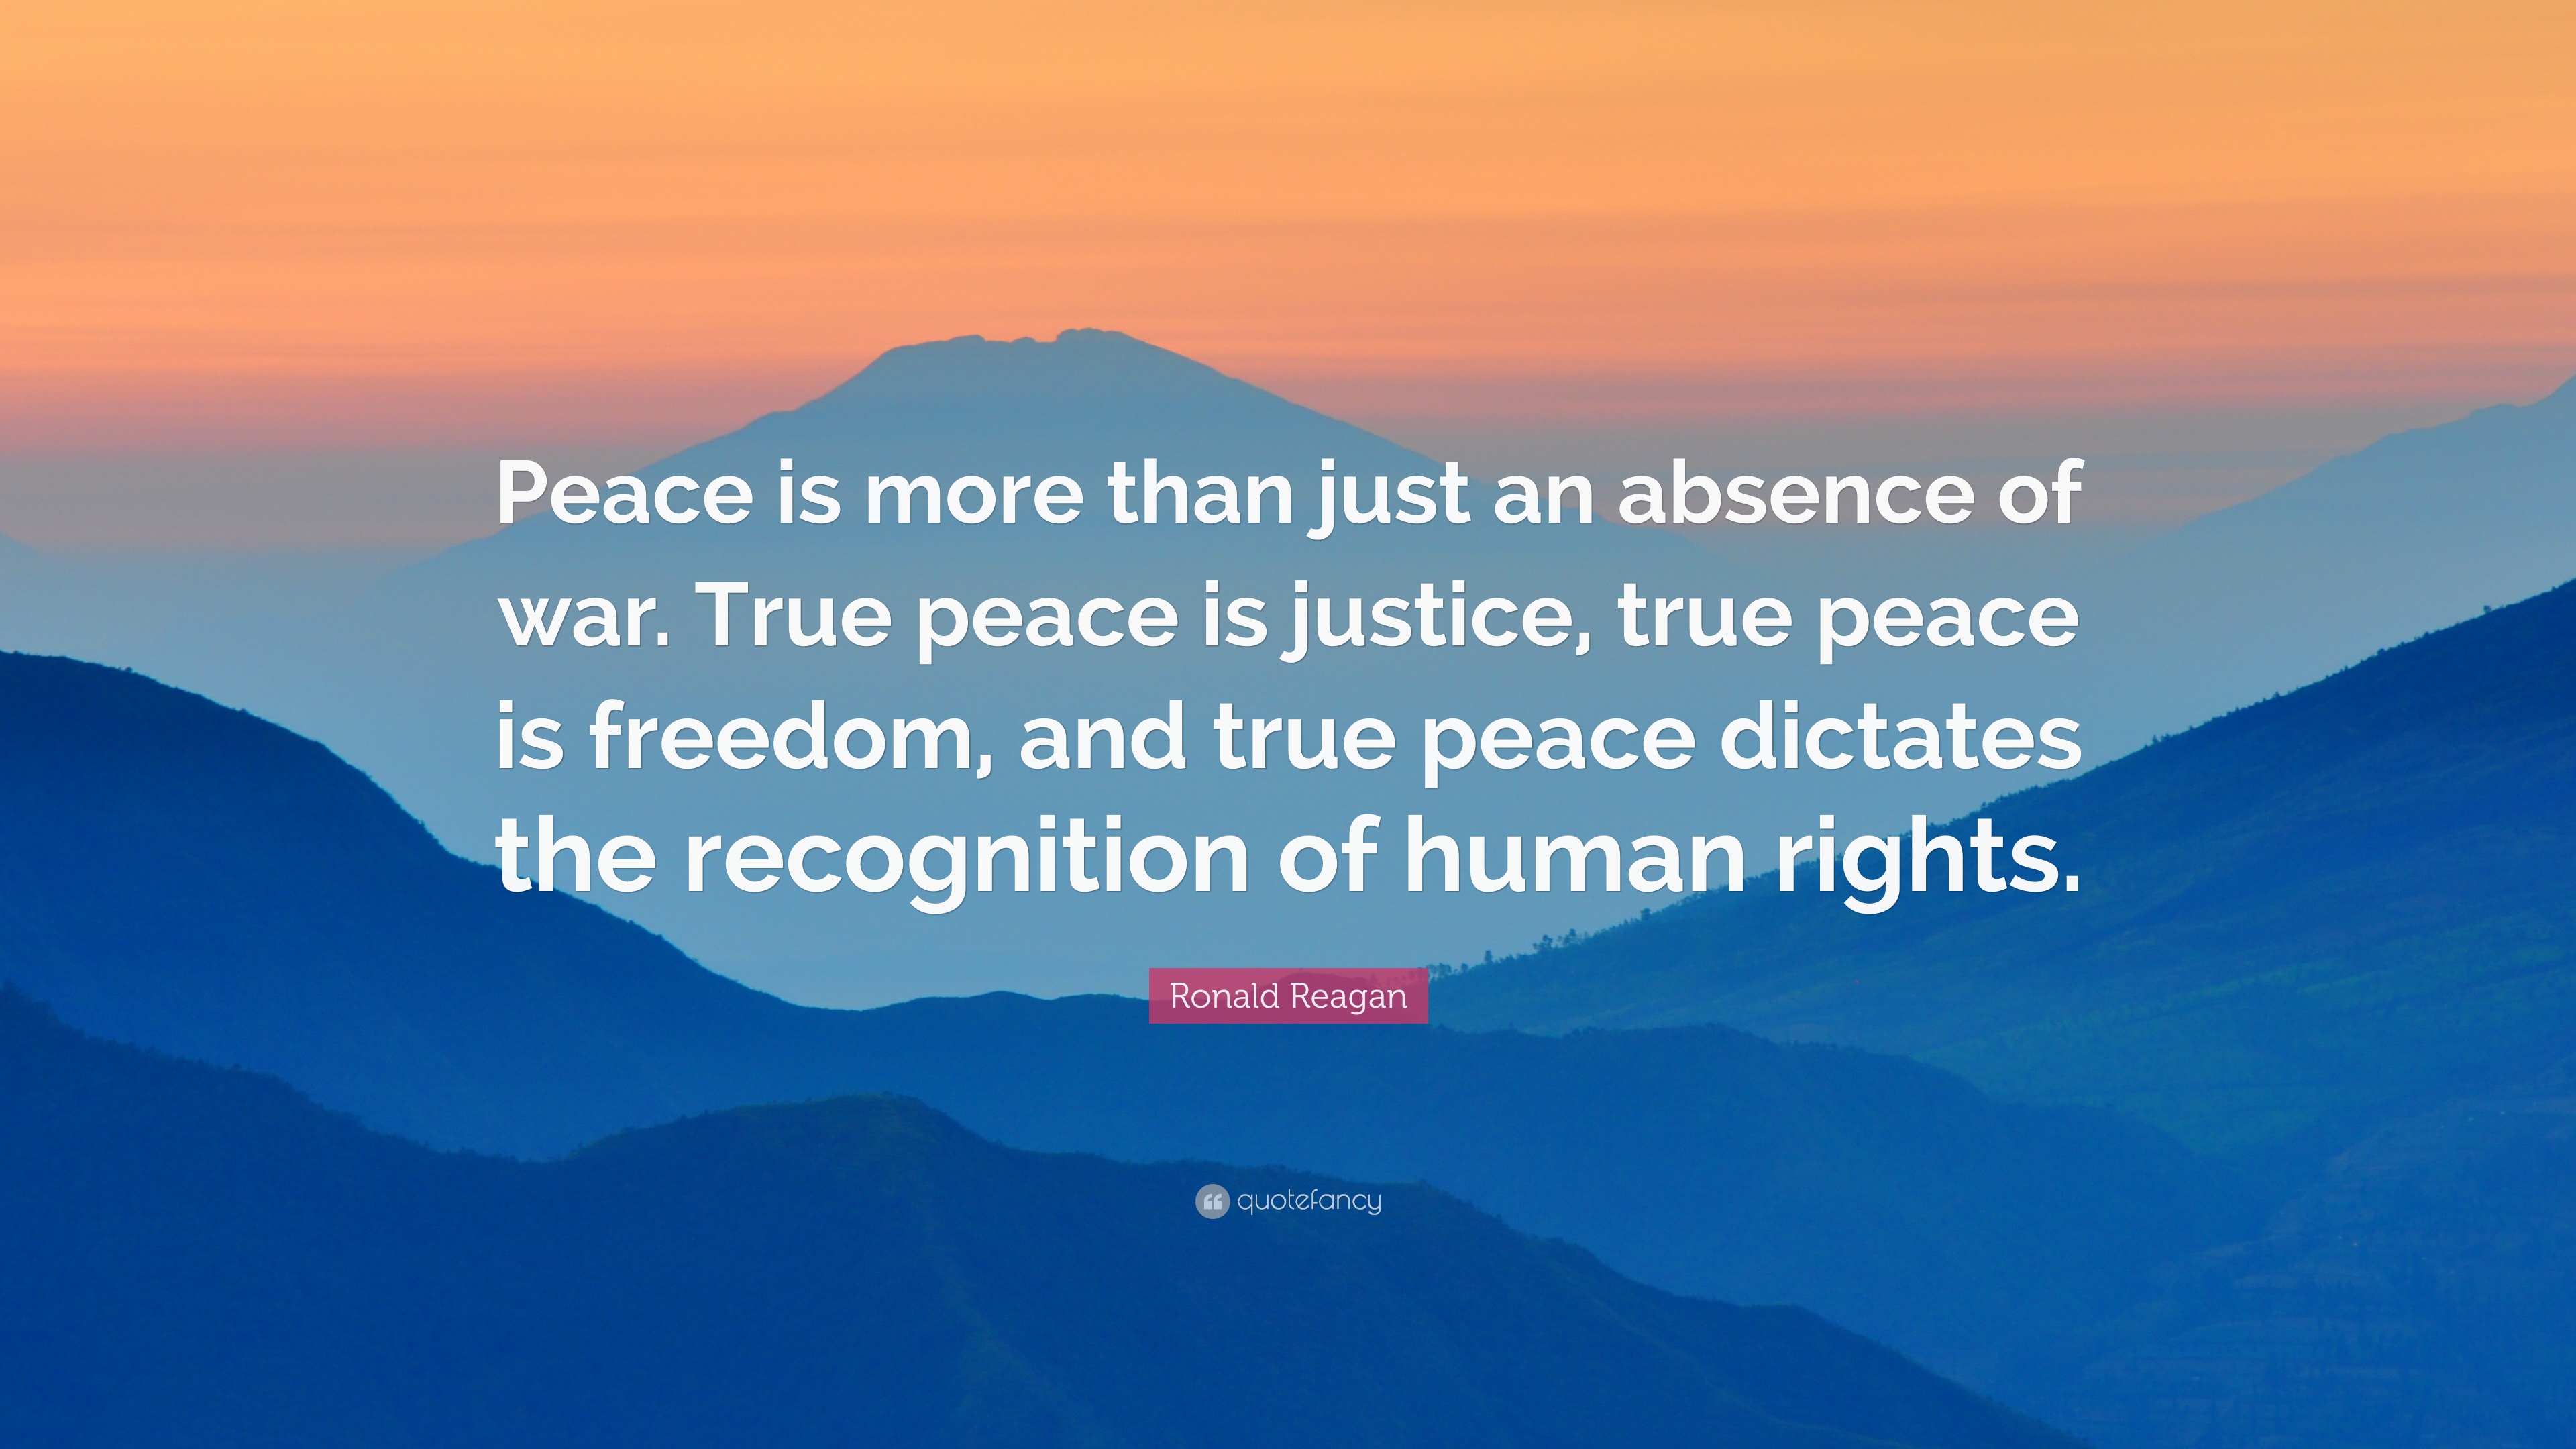 Ronald Reagan Quote: “Peace is more than just an absence of war